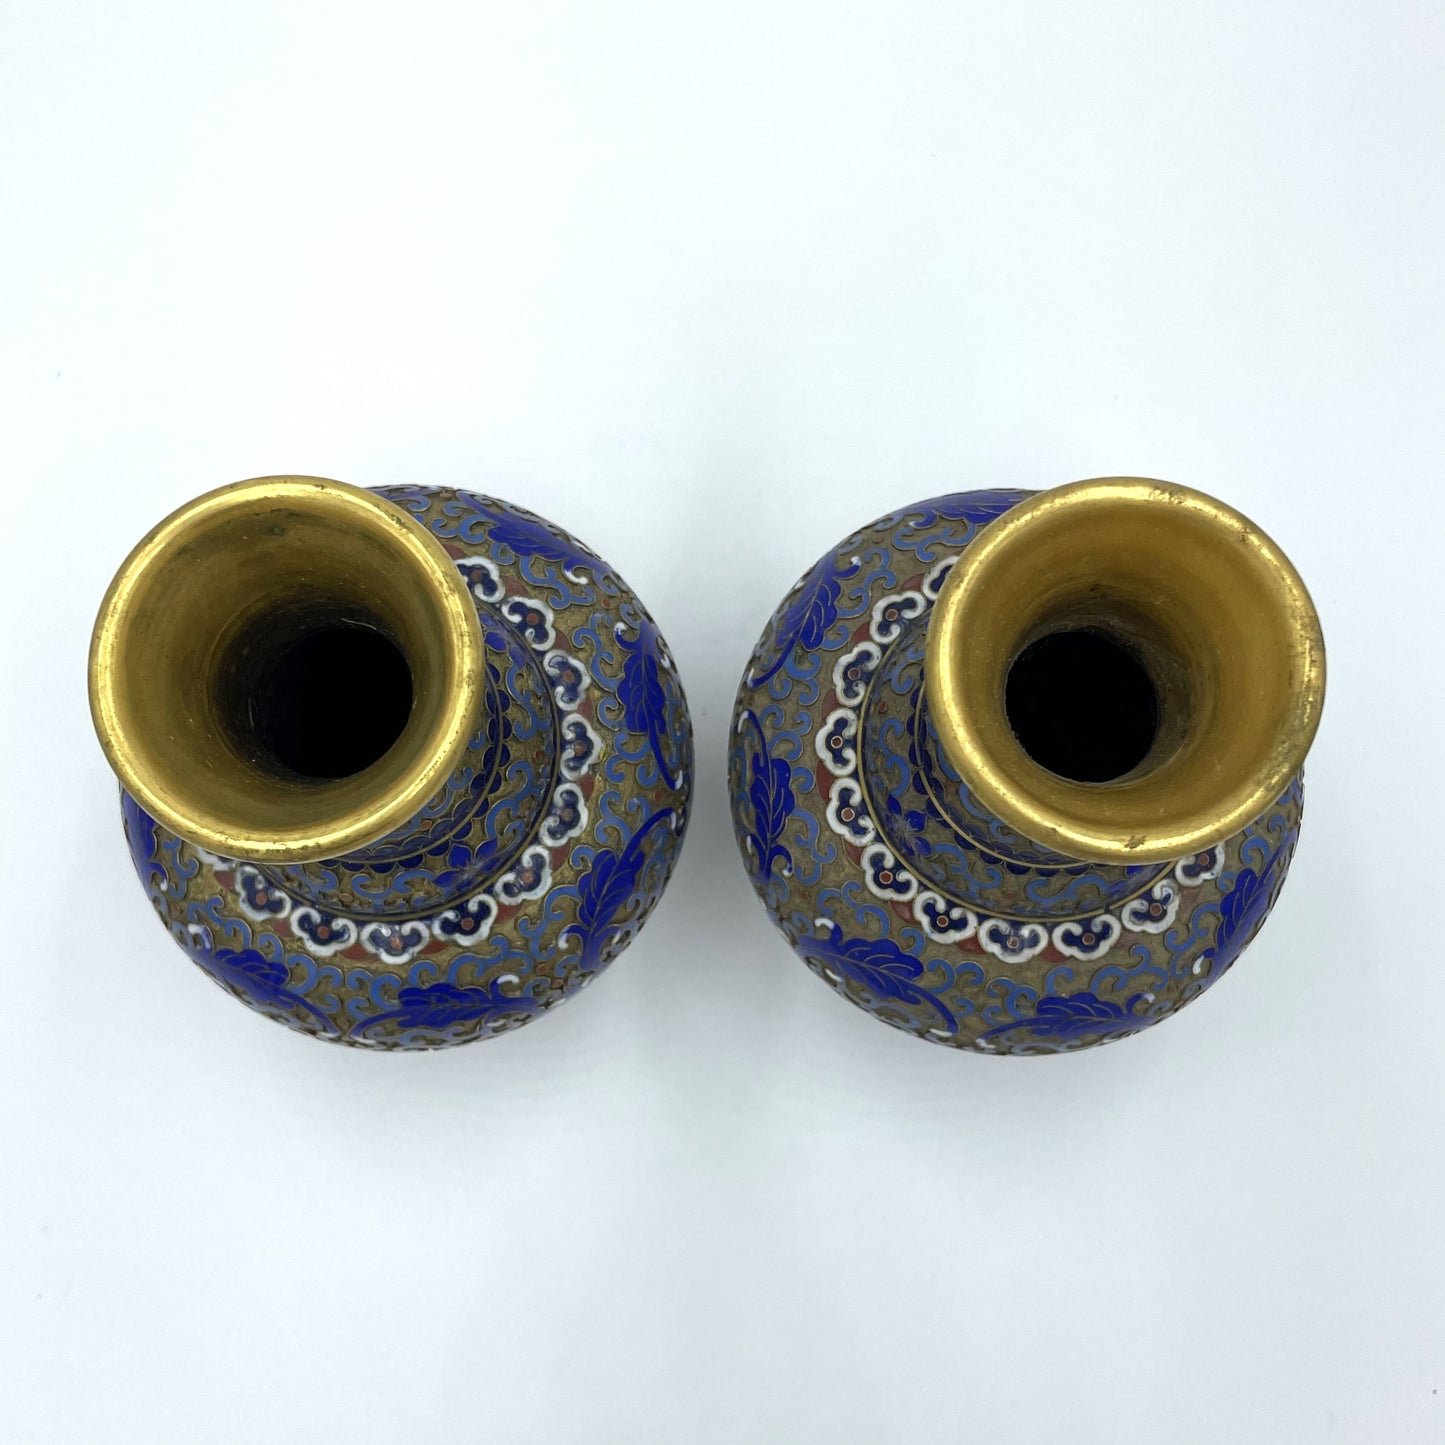 Pair of Large Cloisonne Vases on Stands - 18cm